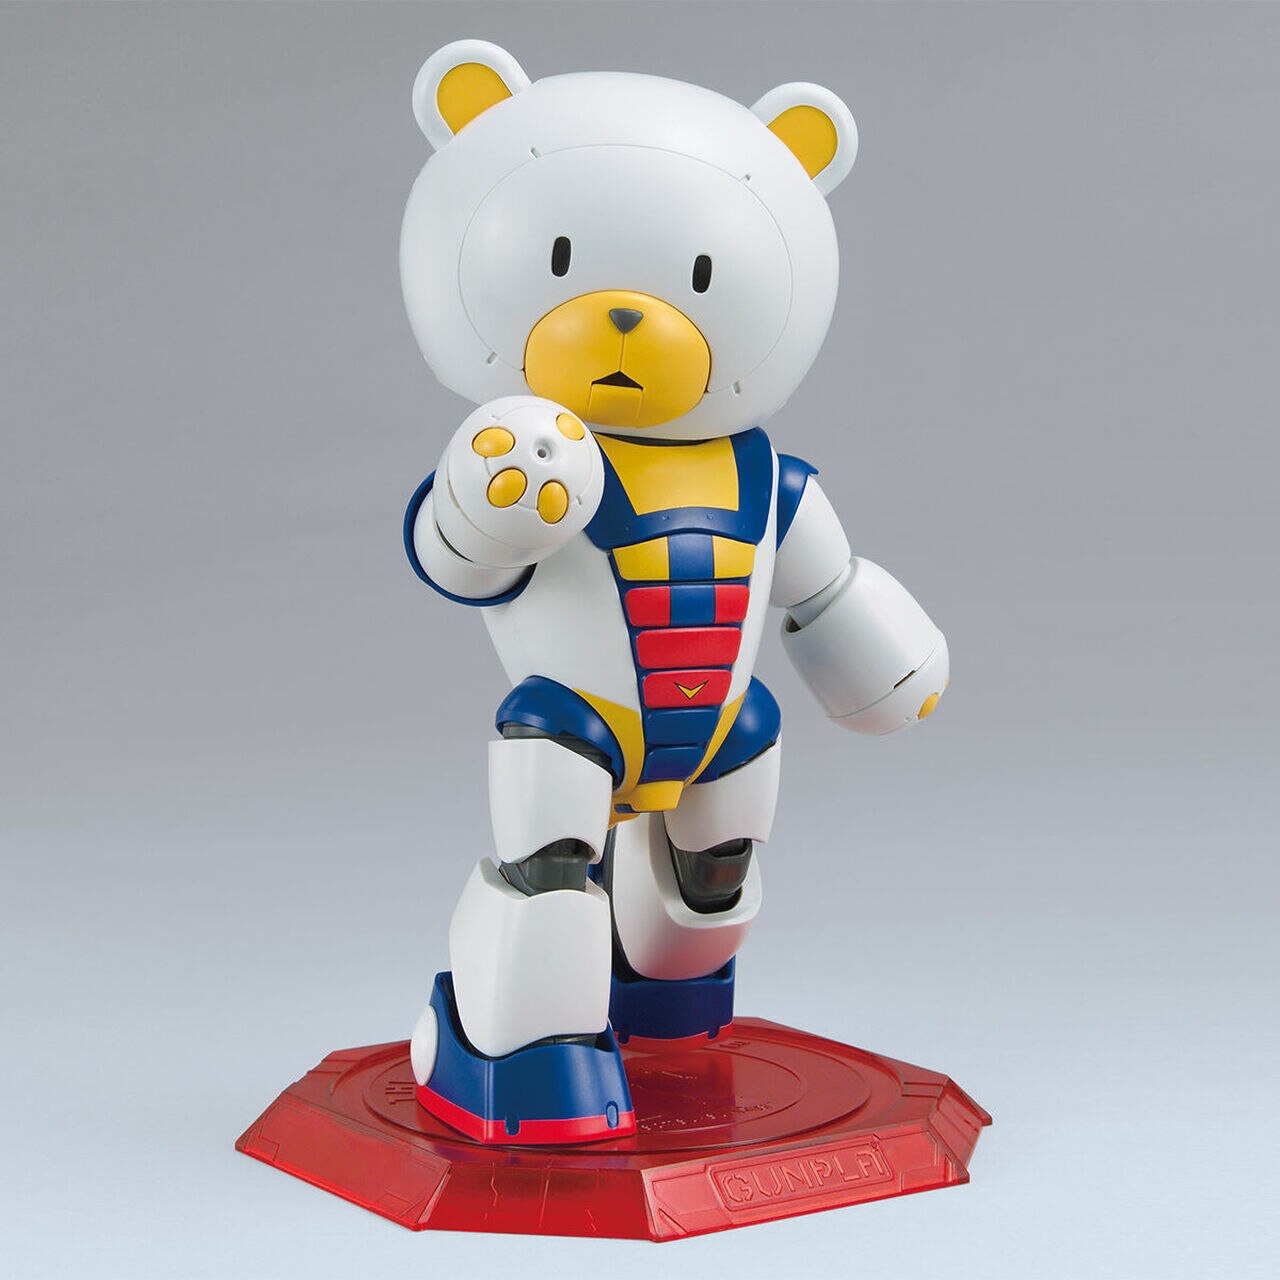 HG 1/144 The Gundam Base Limited Beargguy III [Tricolor Paint]